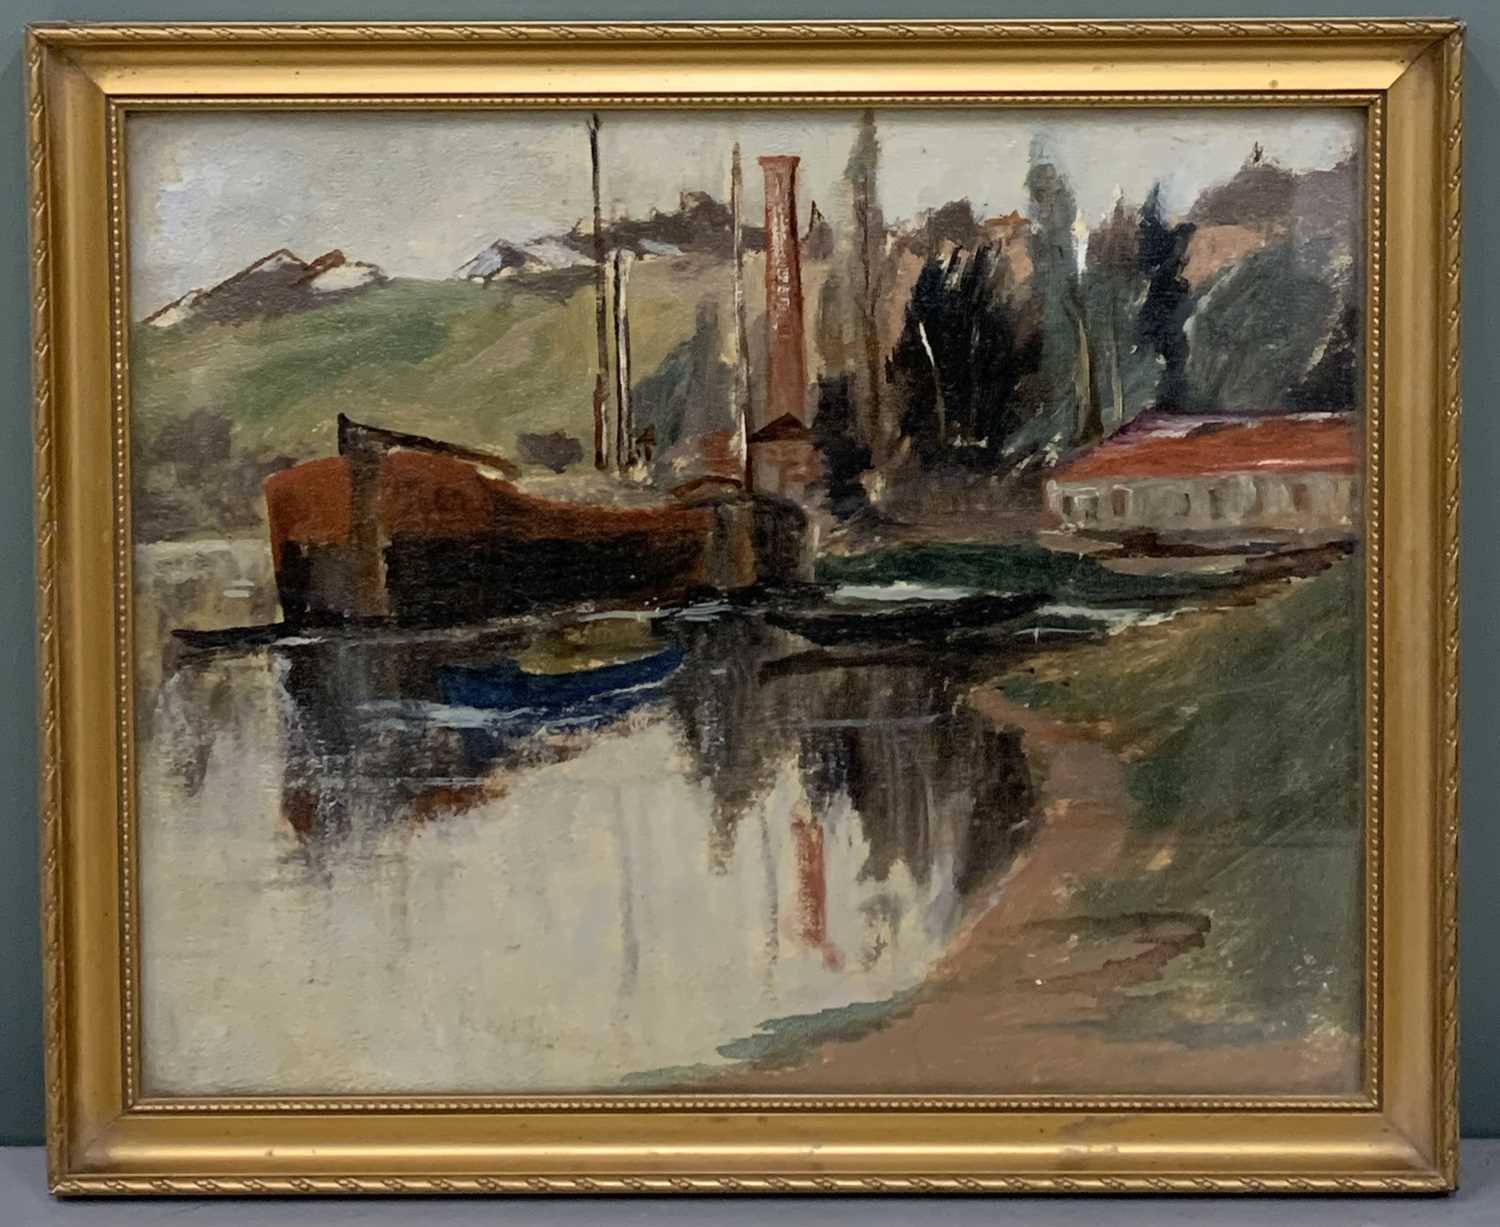 EARLY 20TH CENTURY BRITISH SCHOOL oil on board - depicting Thames type barges on a river near a tall